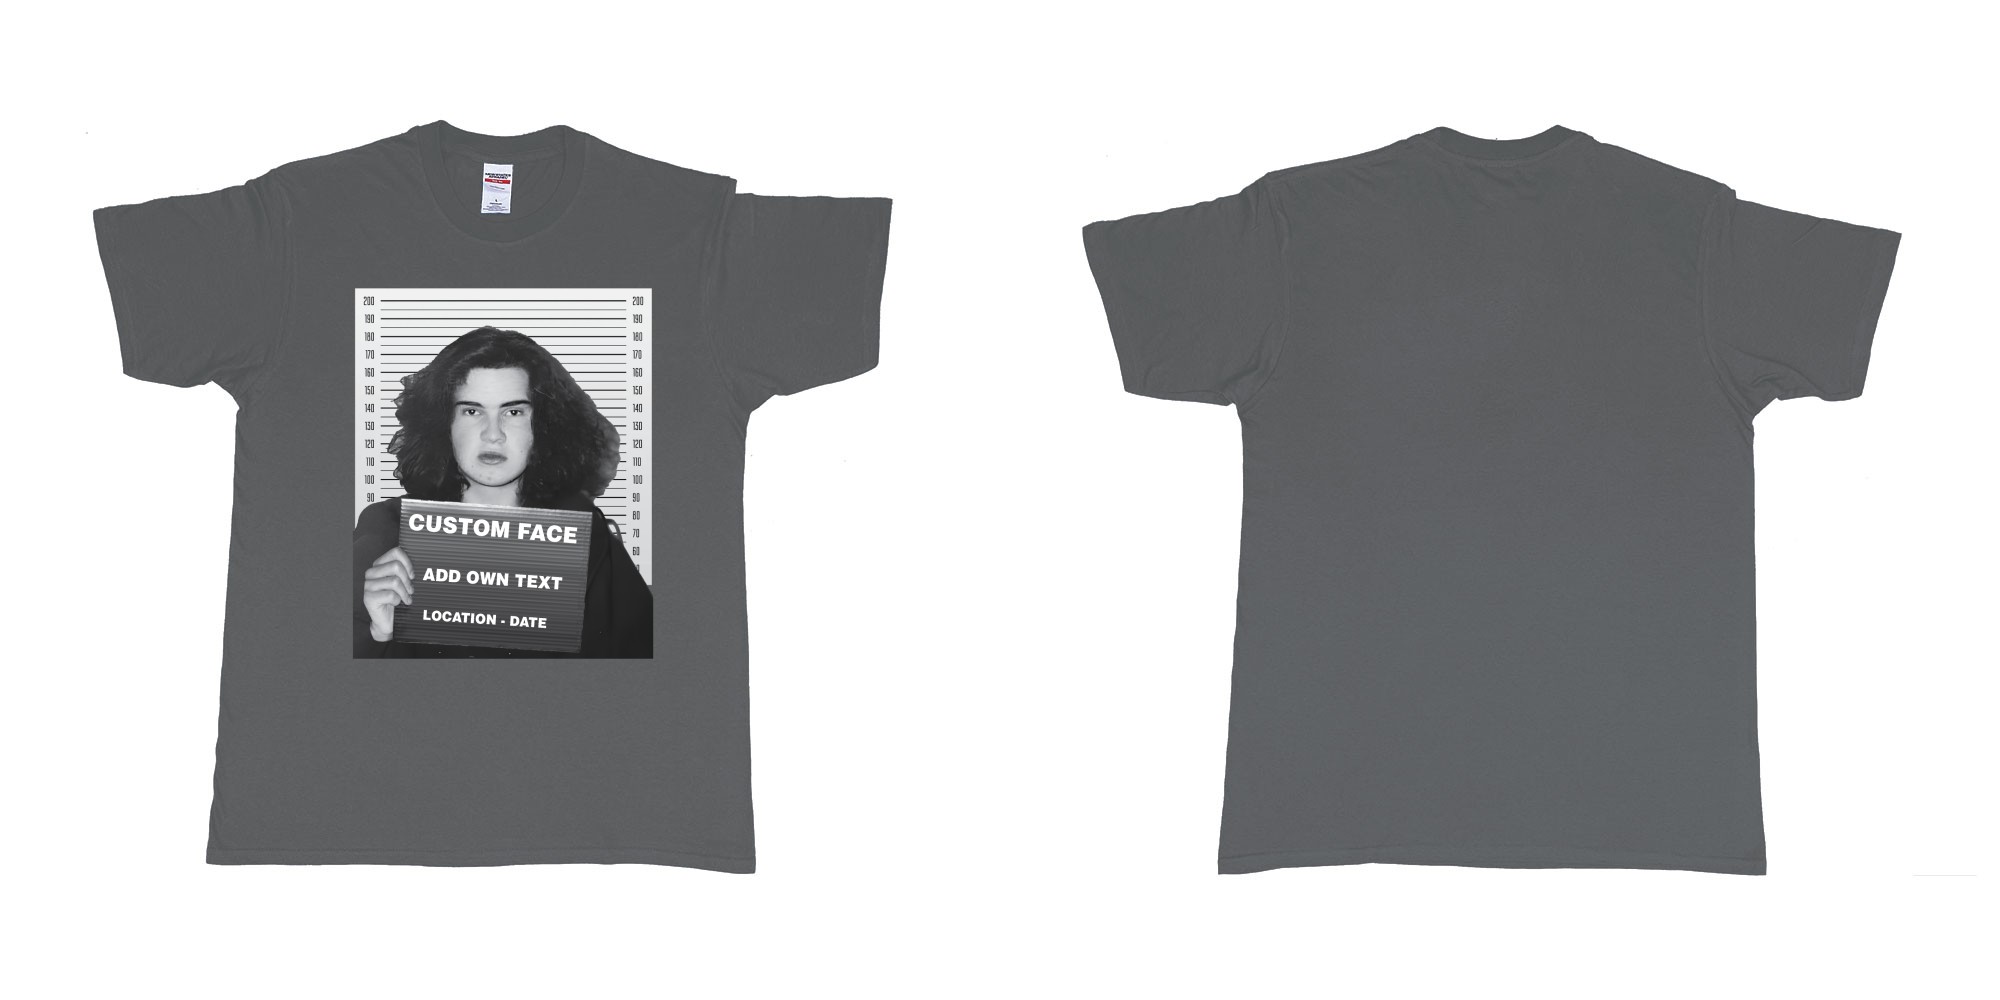 Custom tshirt design jimmy carr arrested bali mugshot in fabric color charcoal choice your own text made in Bali by The Pirate Way